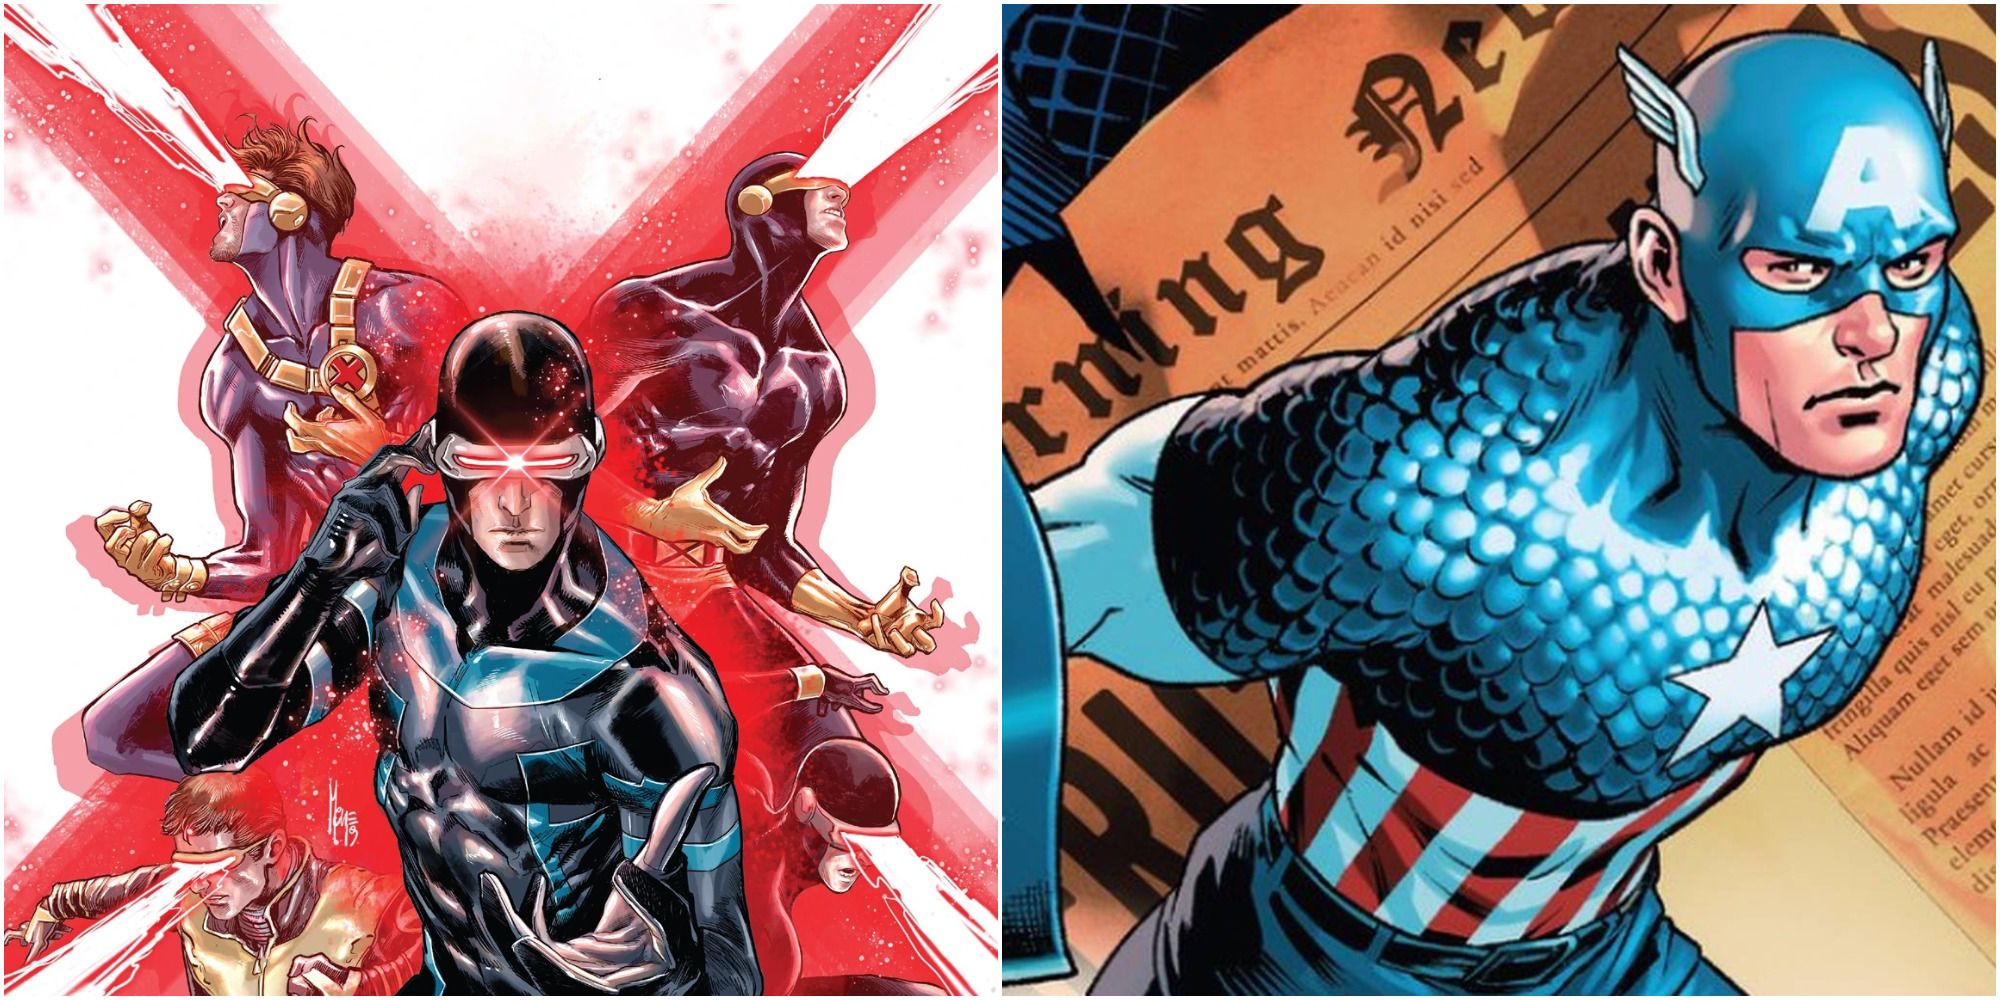 Cyclops and Captain America